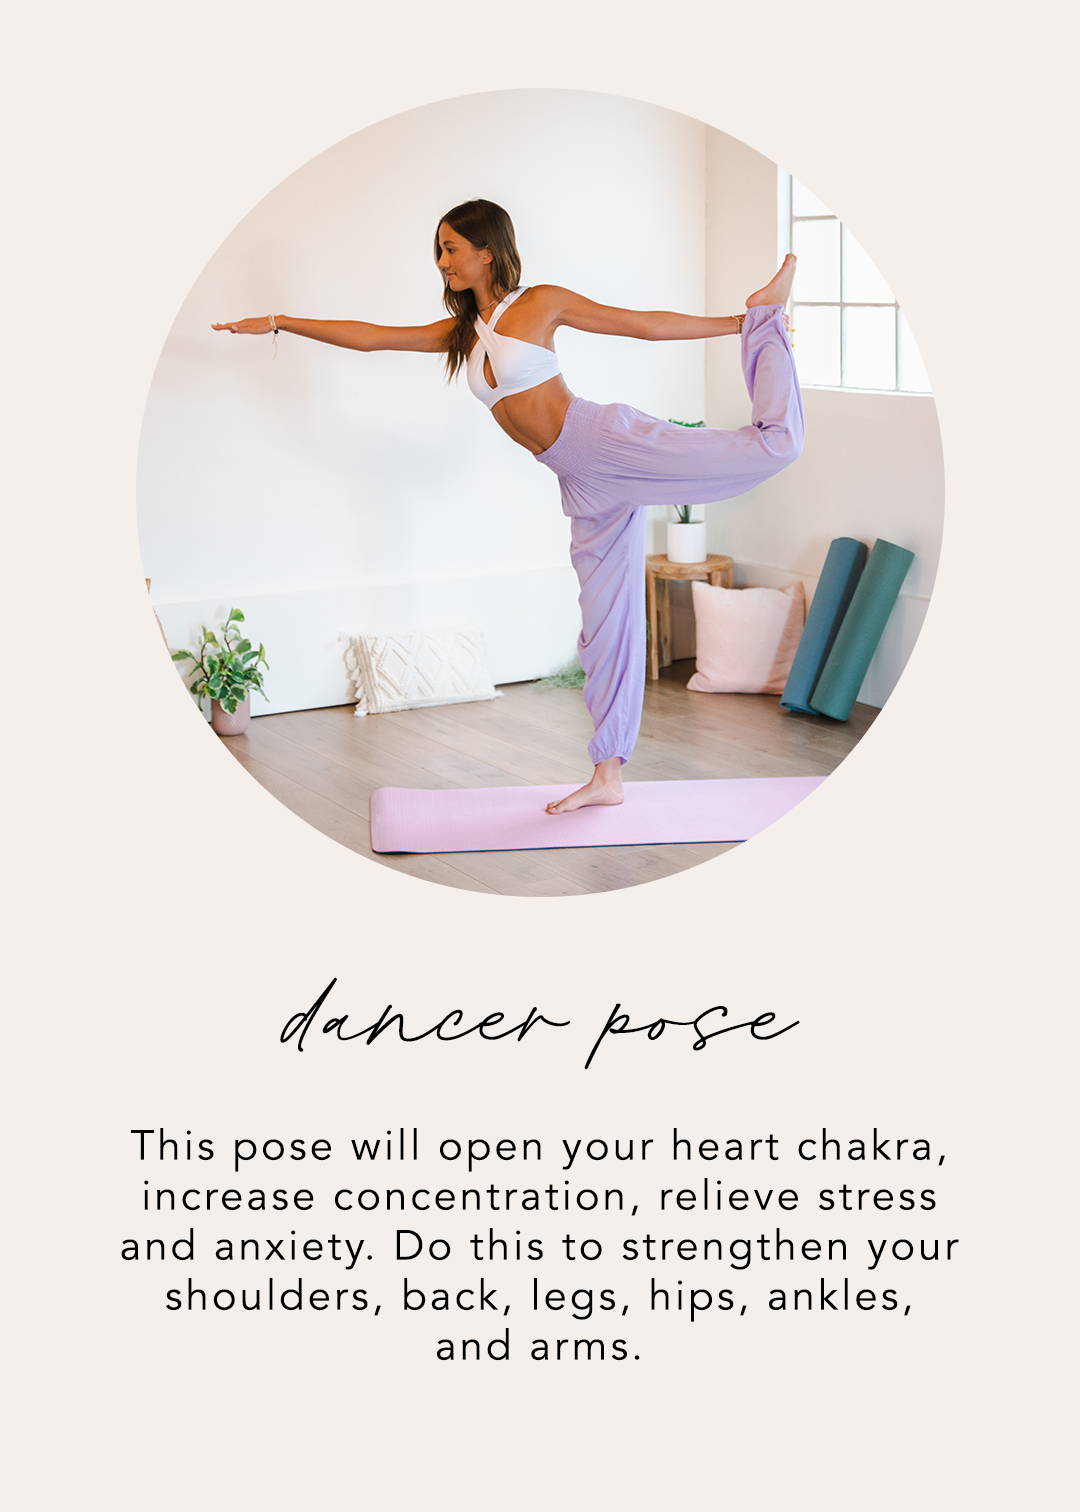 Dancer Pose: This pose will open your heart chakra, increase concentration, relieve stress and anxiety. Do this to strengthen your shoulders, back, legs, hips, ankles, and arms.